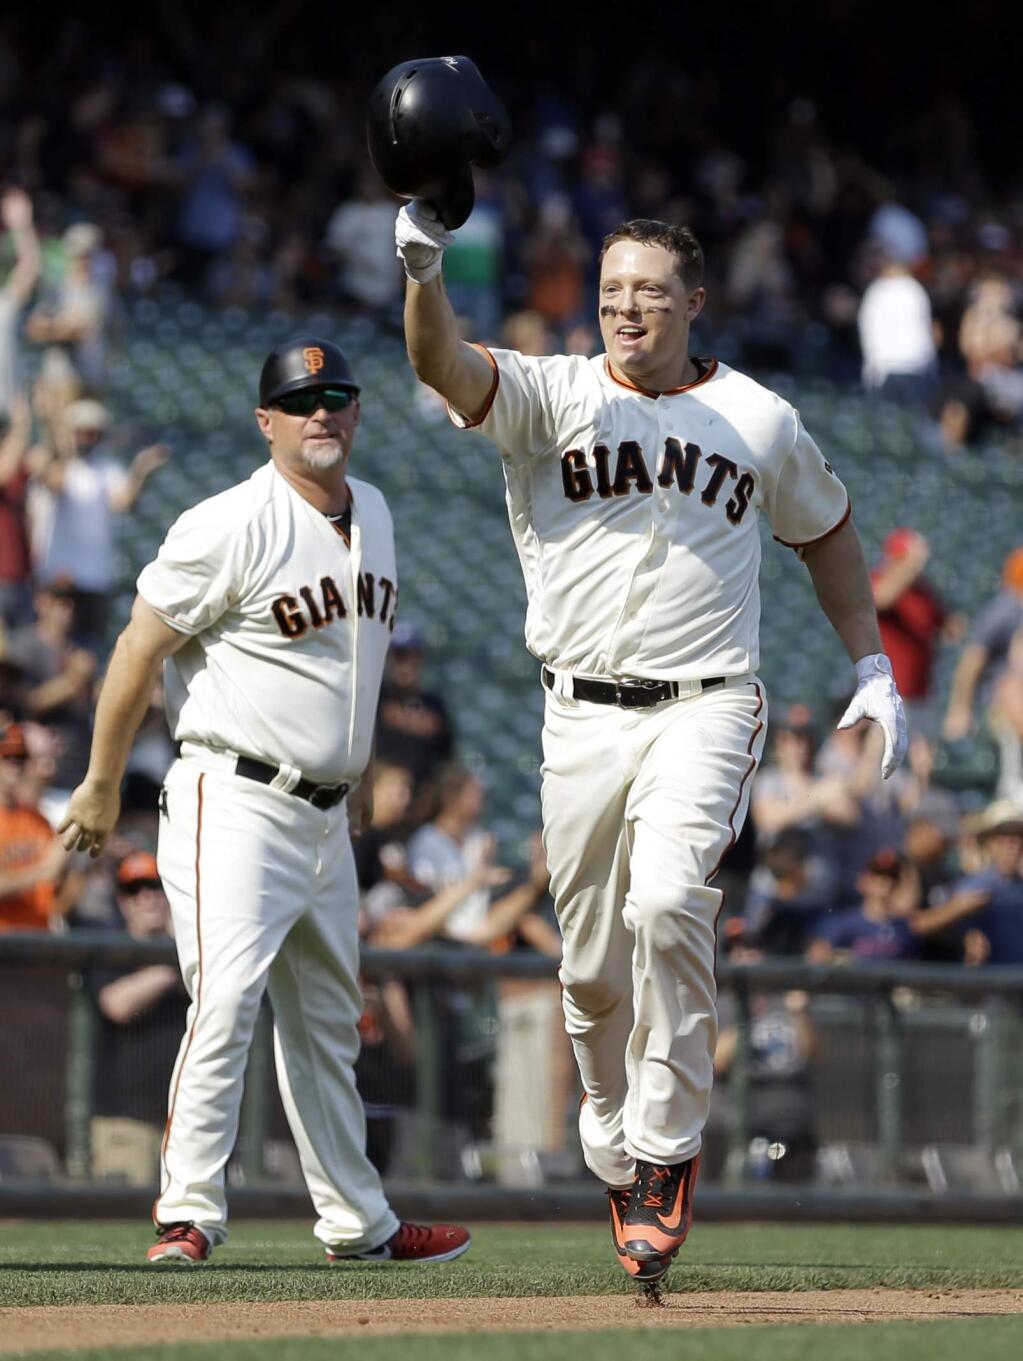 San Francisco Giants' Nick Hundley, right, celebrates after hitting a home run against the St. Louis Cardinals to win the baseball game in the tenth inning on Saturday, Sept. 2, 2017, in San Francisco. (AP Photo/Ben Margot)